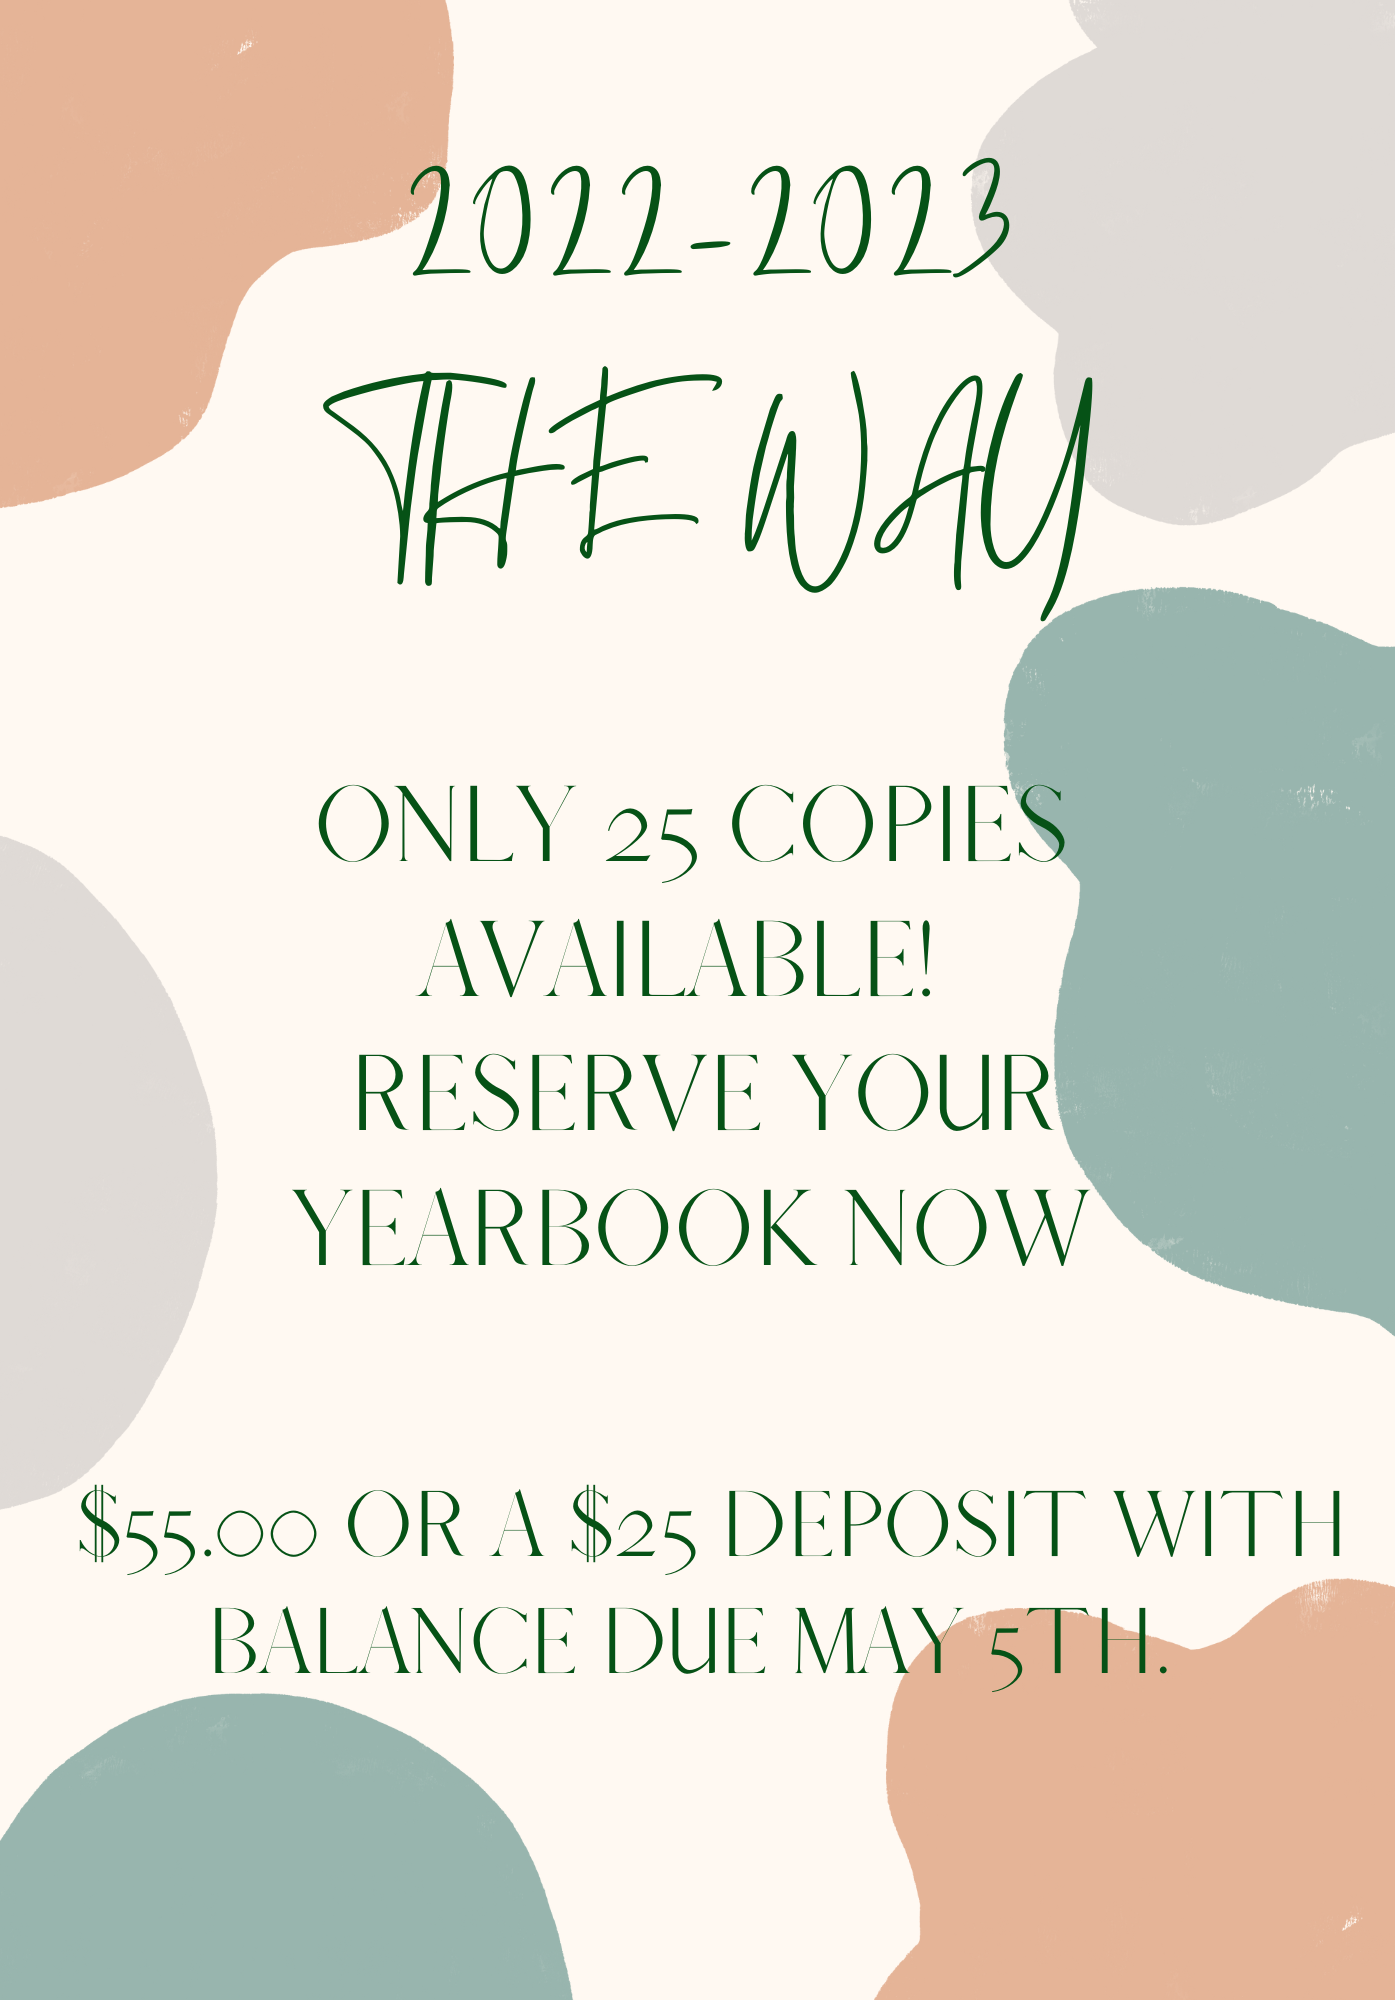 Final Yearbook sale